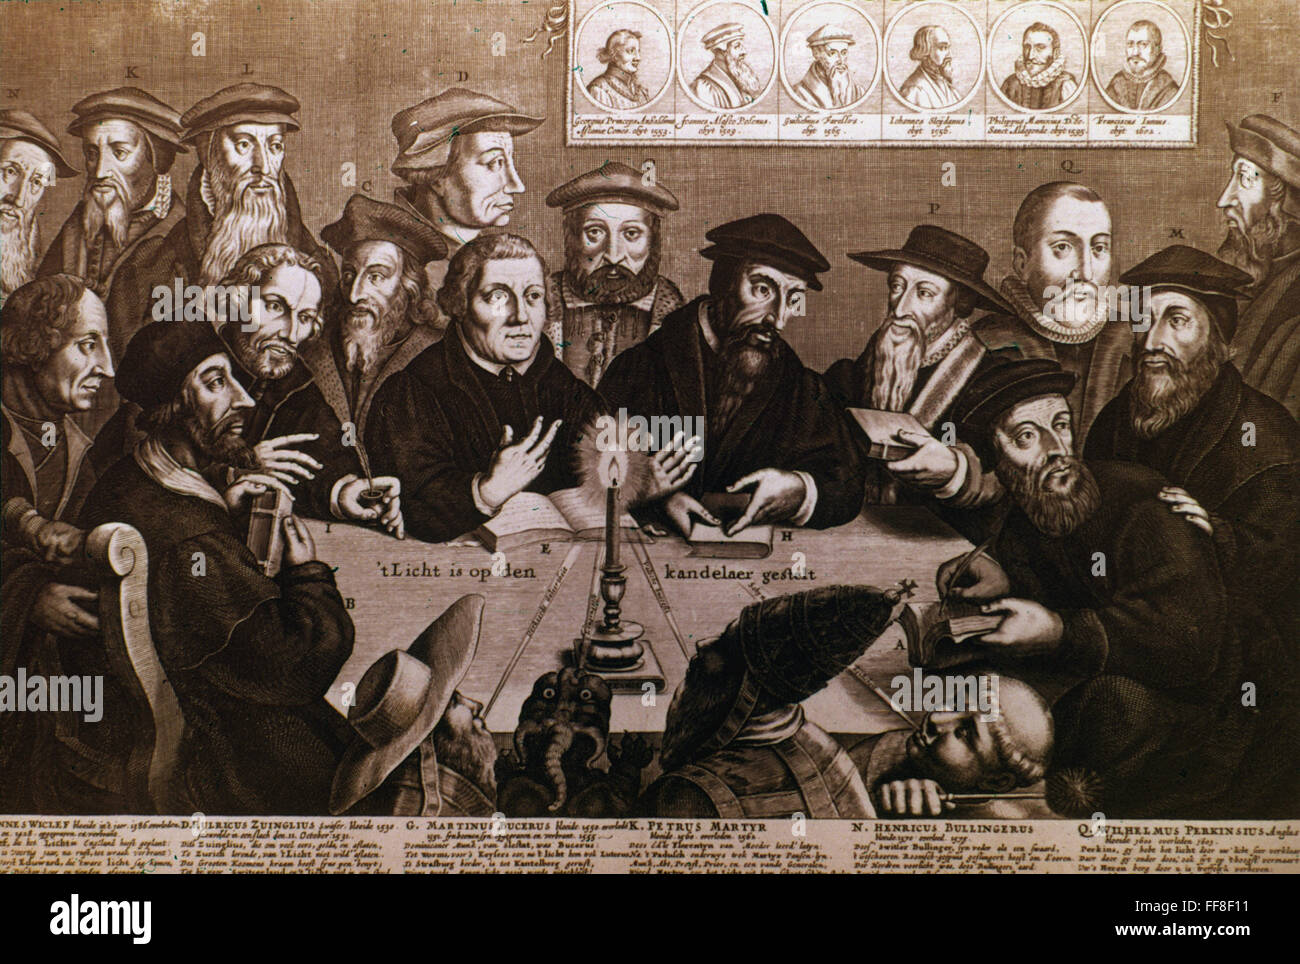 martin-luther-nand-reformation-leaders-copper-engraving-dutch-17th